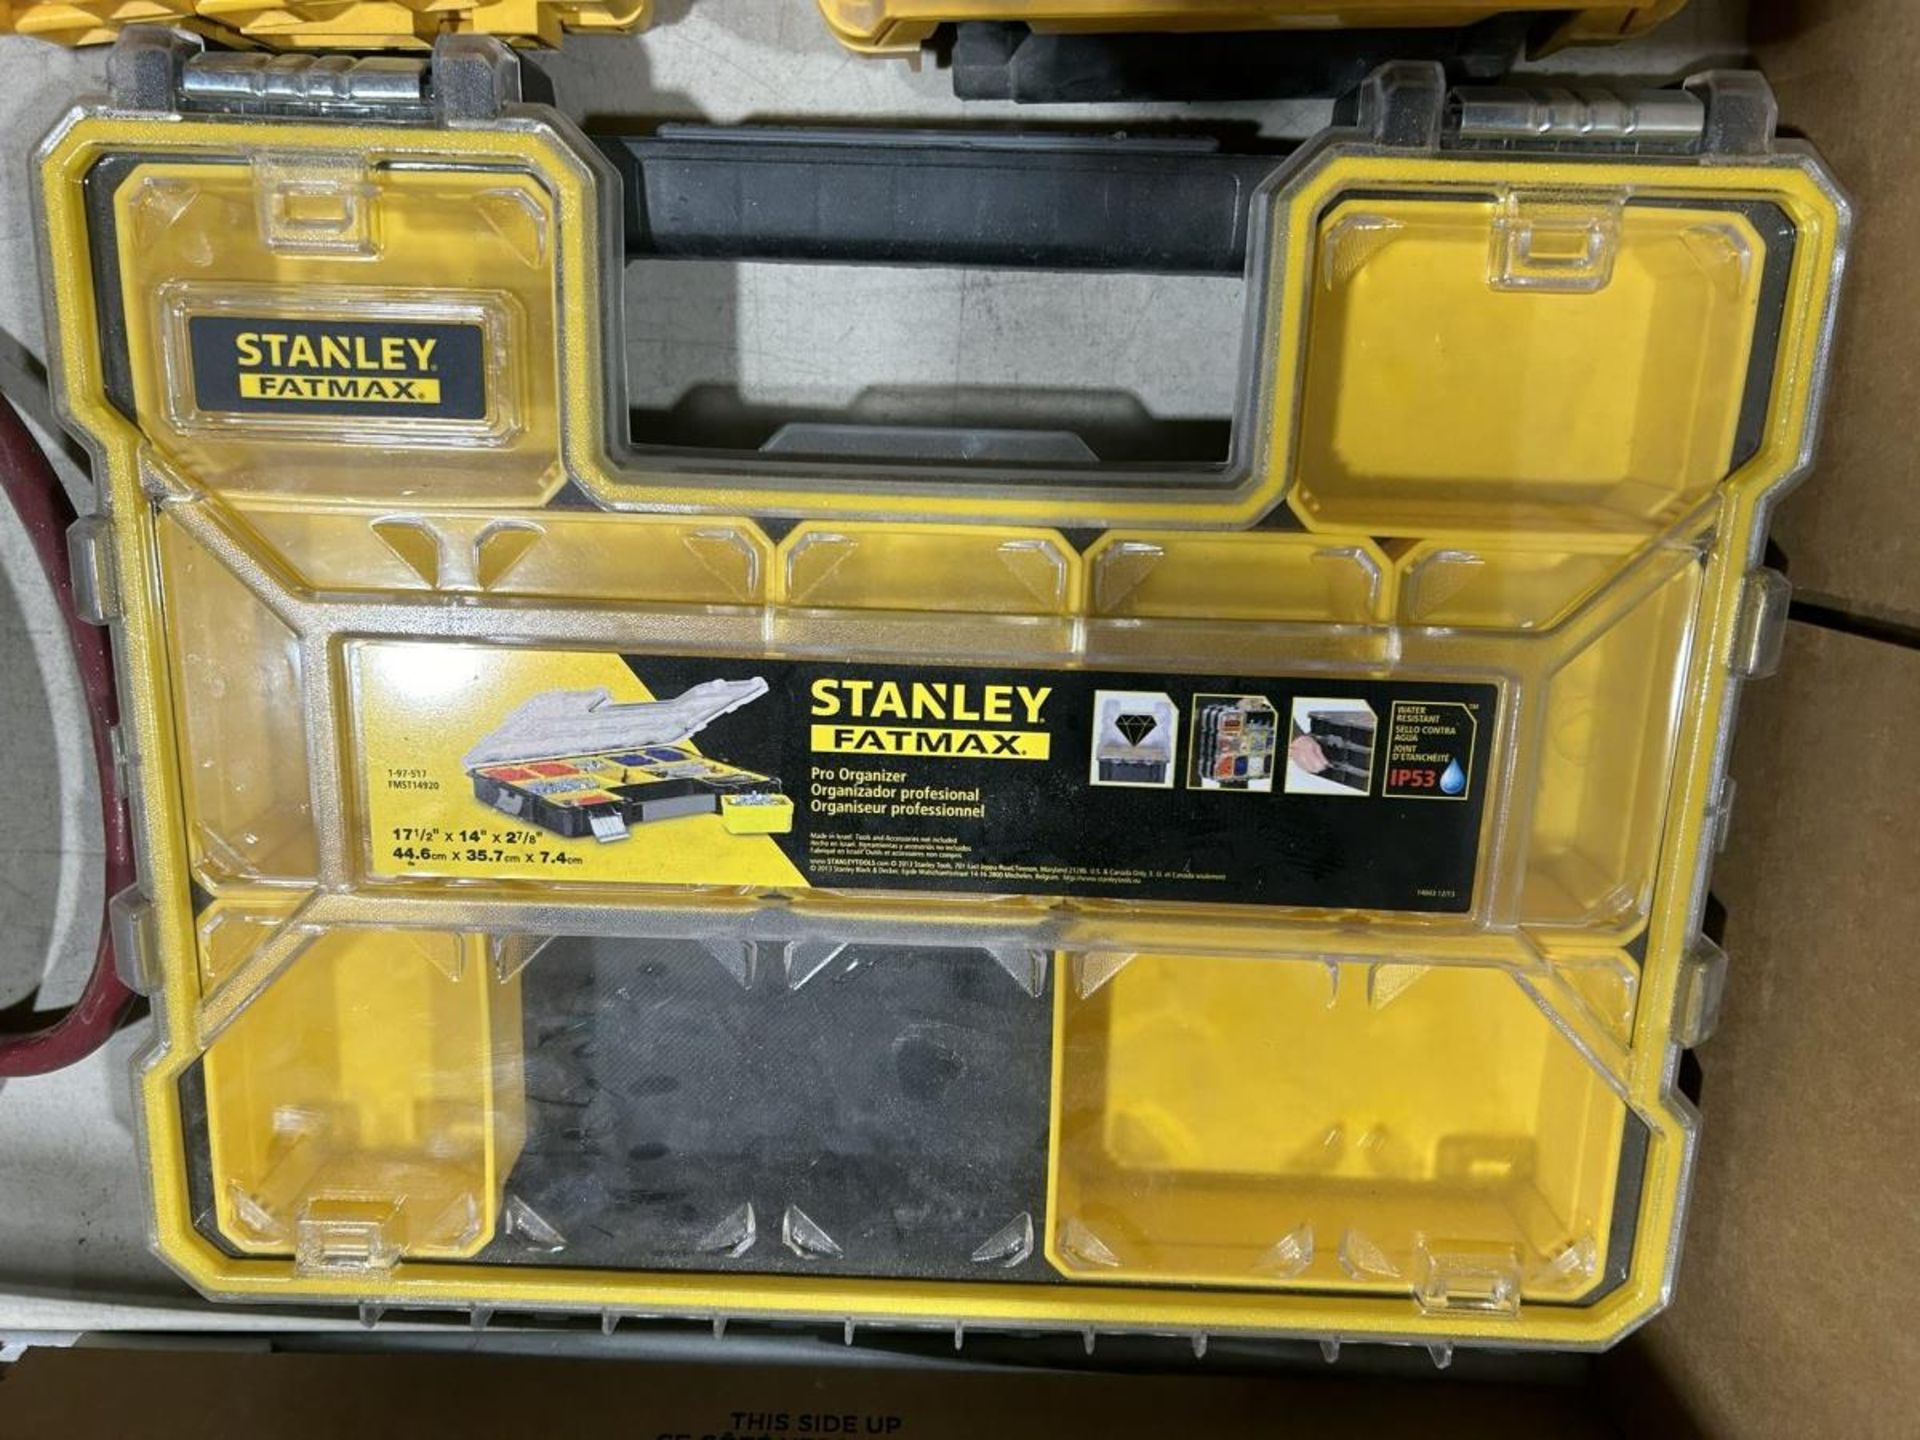 L/O ASSORTED DEWALT DRIVER BIT BOXES, DRIVER BITS, STANLEY POLY TOOL BOX - Image 2 of 14